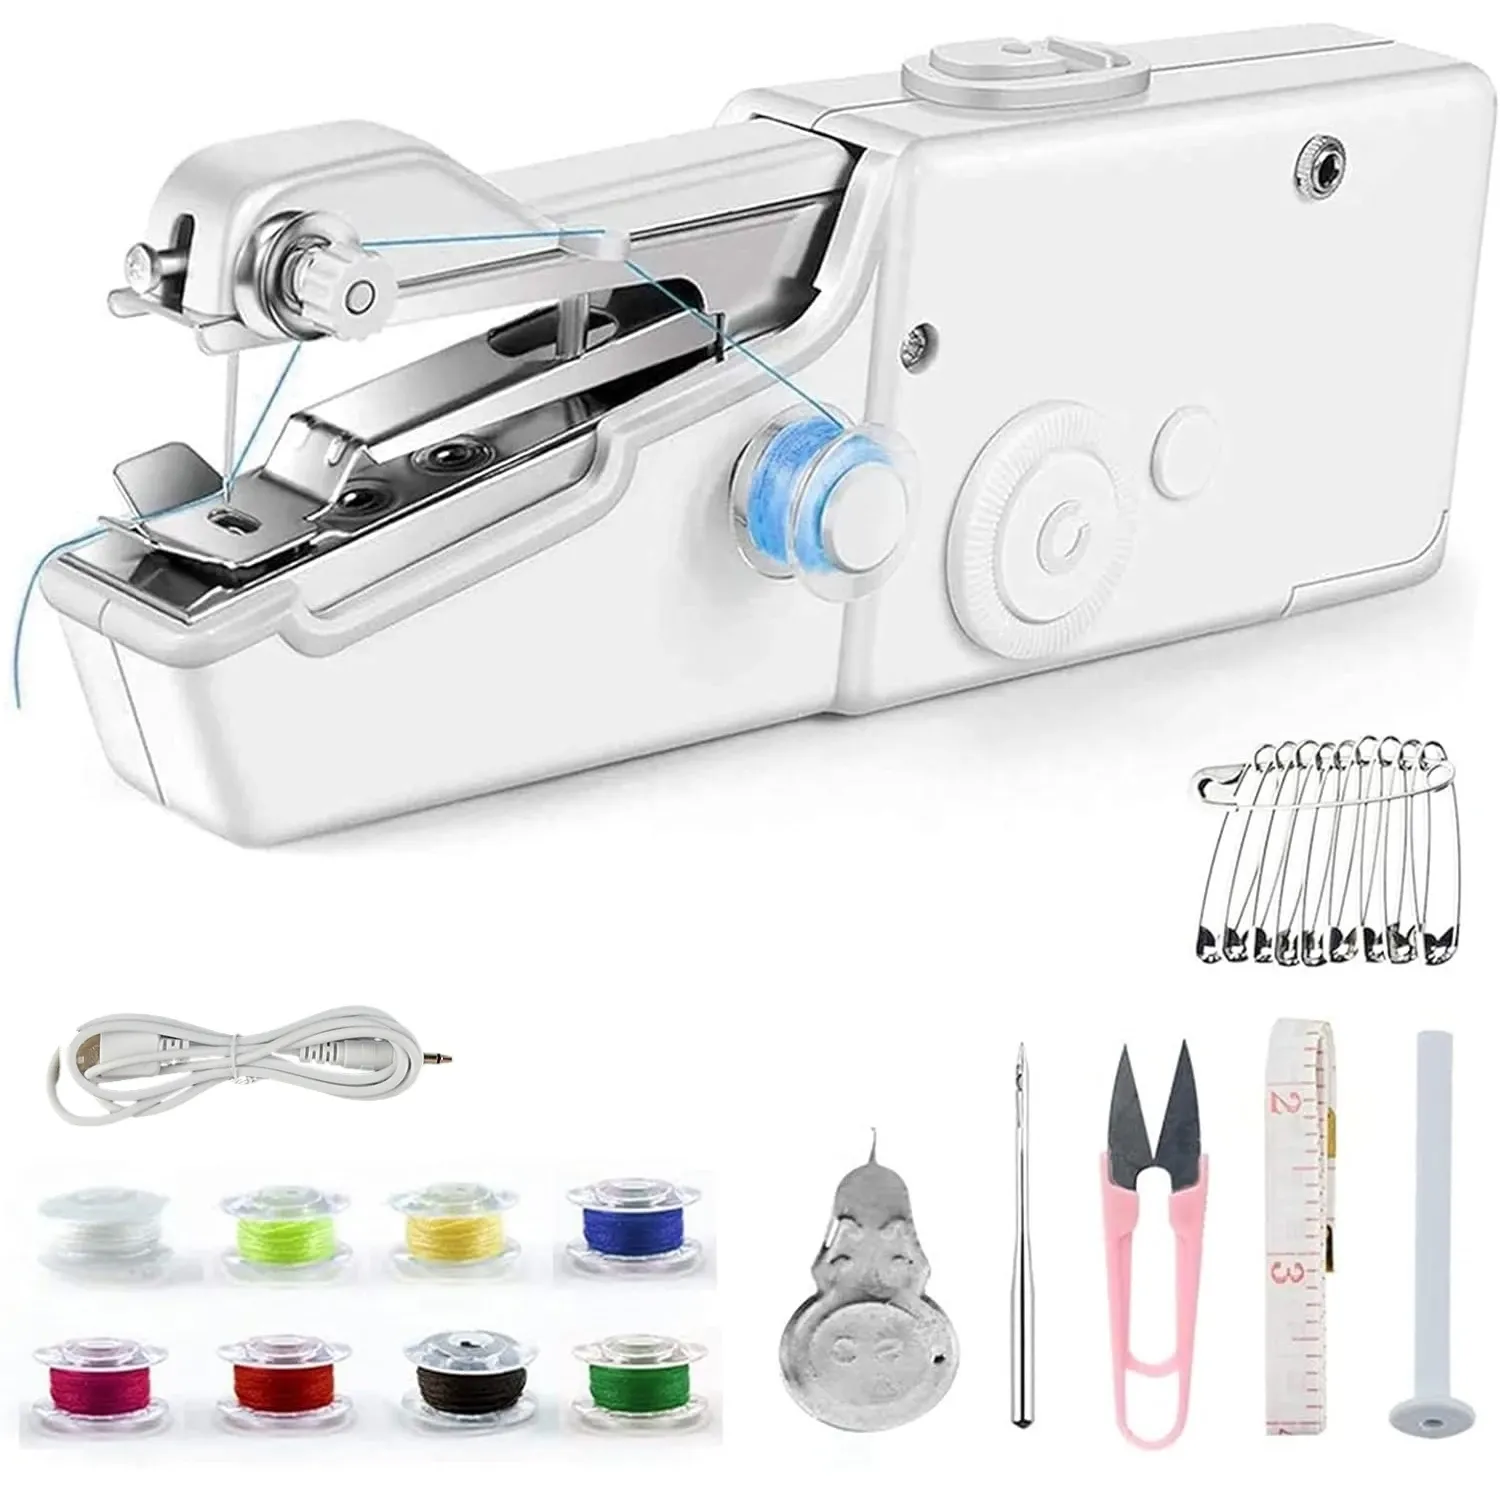 Machines Handheld Sewing Machine, Mini Portable Quick Handy Stitching Machine,Electric Sewing Tool for Beginners, for Home/Travel/DIY